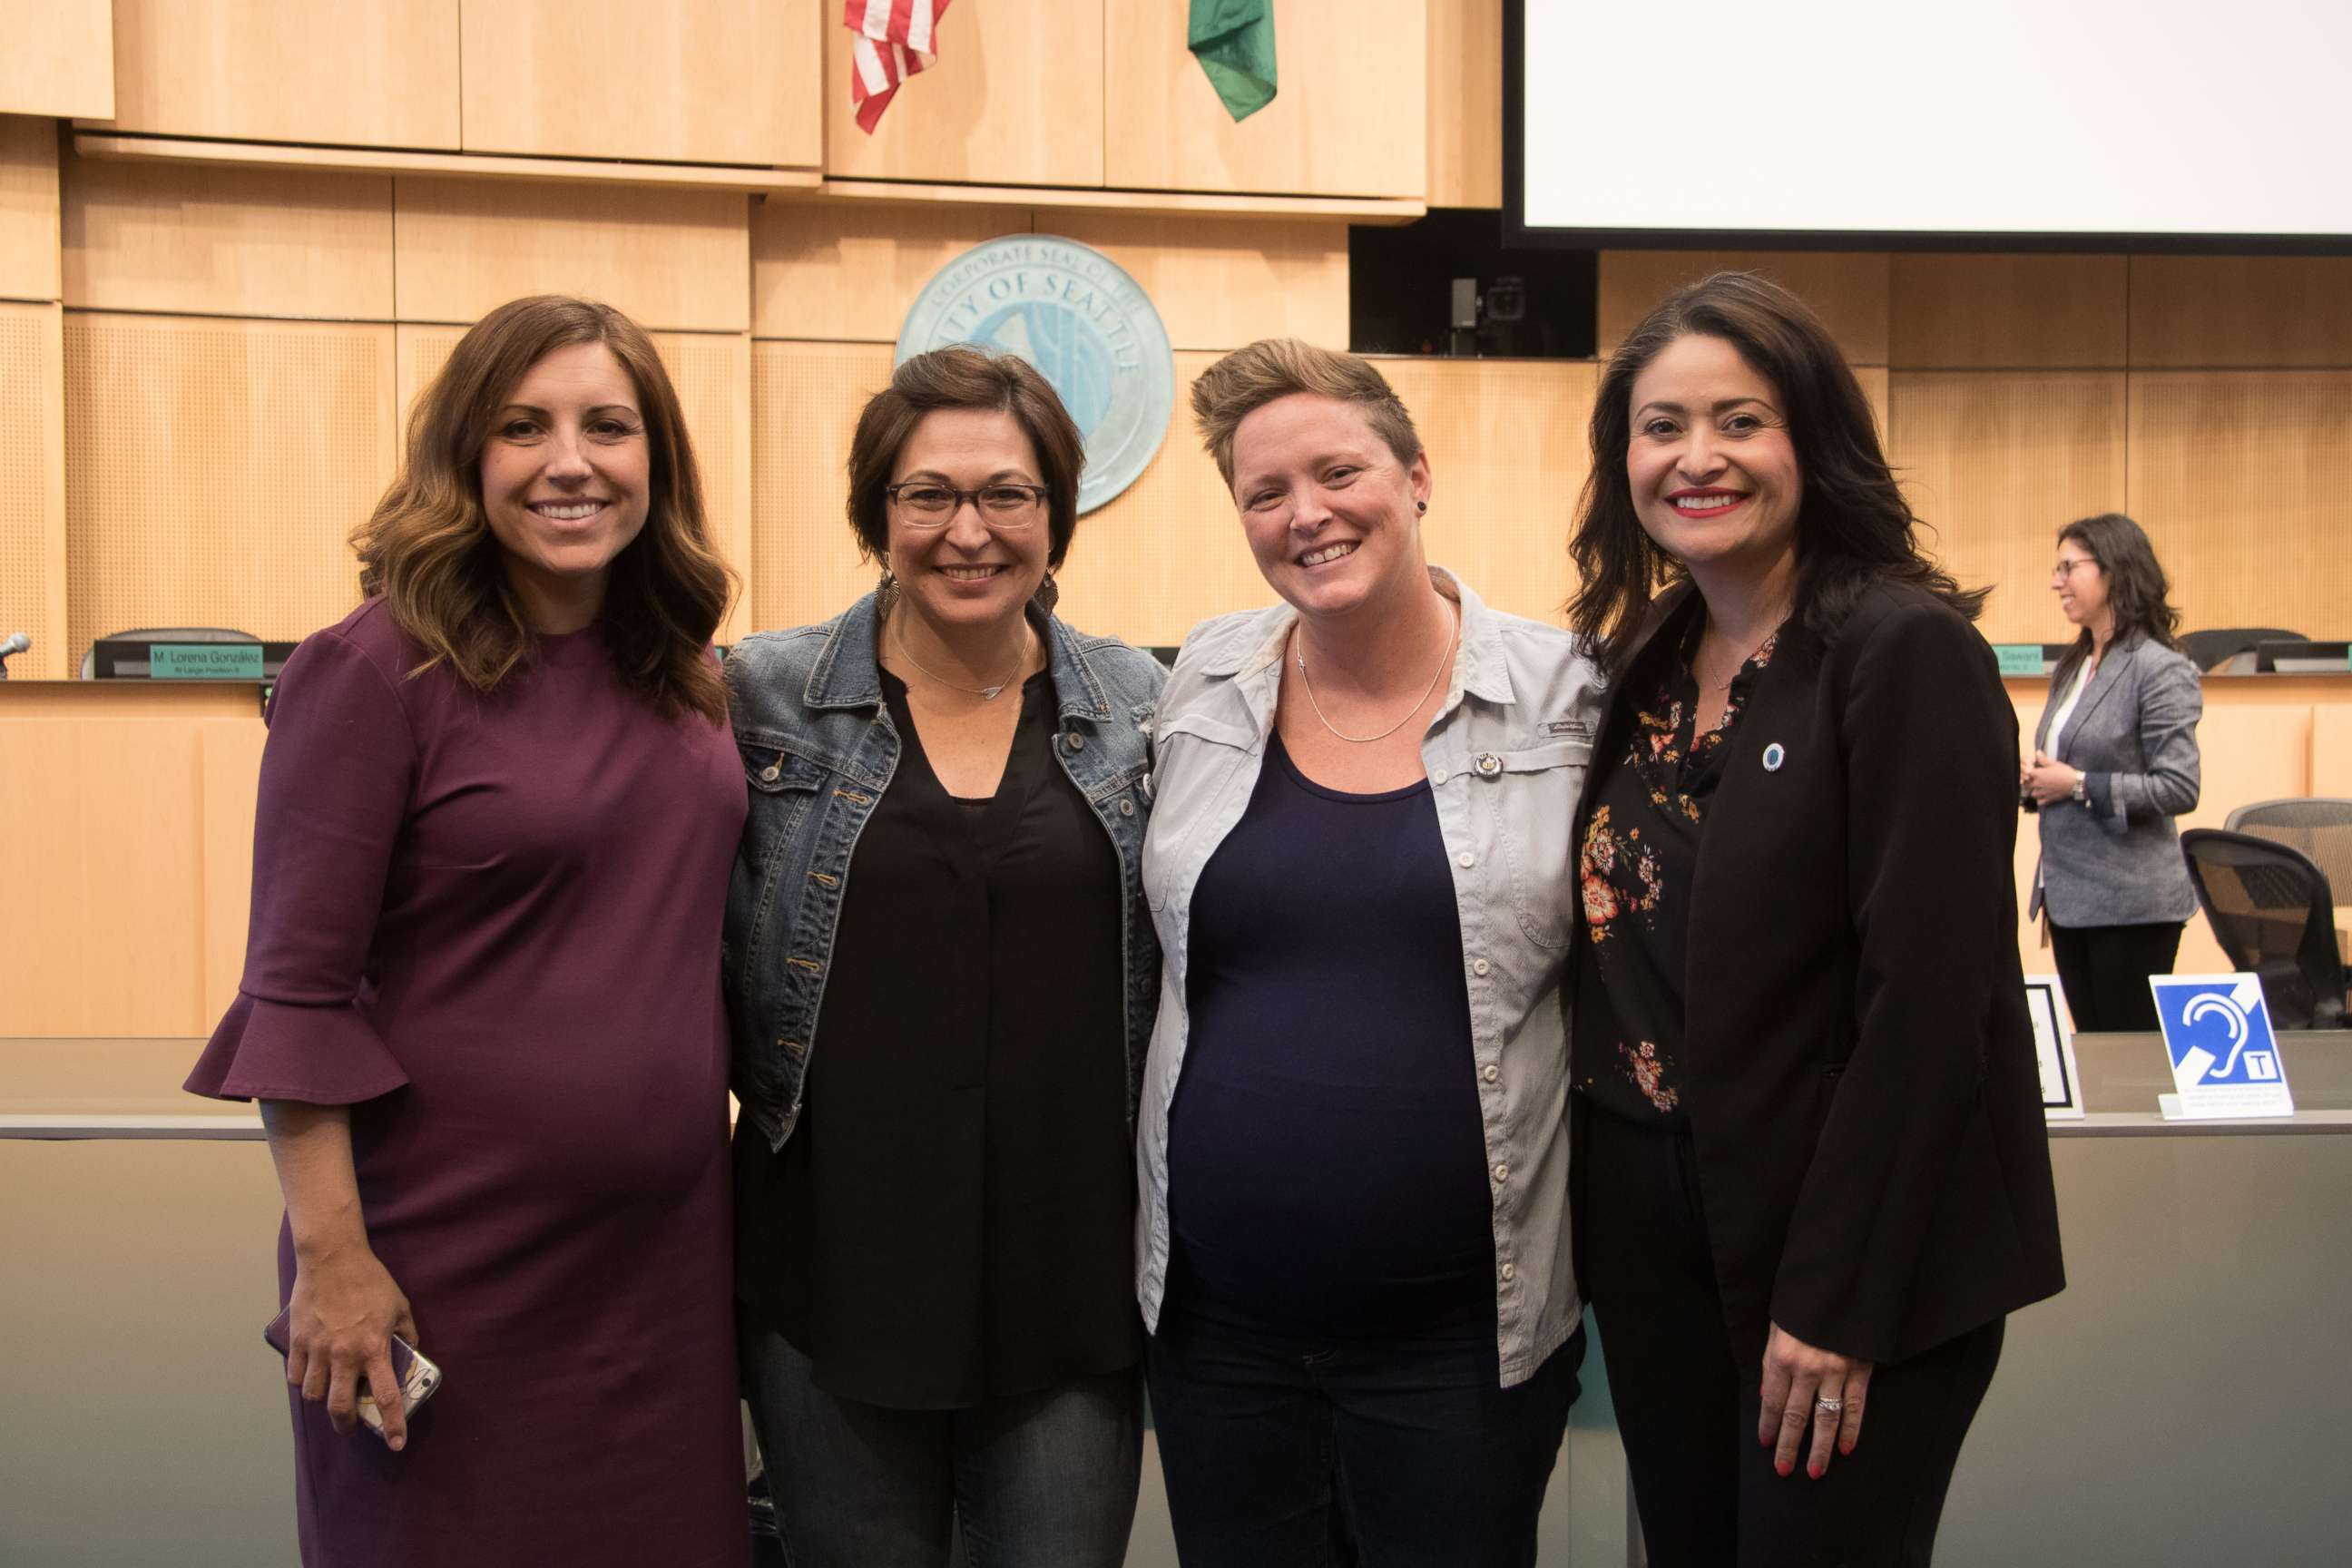 PHOTO: From left to right, Seattle Council Member Teresa Mosqueda, Erin Alder, Rachel Alder and Seattle Council Member Lorena Gonzalez pose on June, 3, 2019.